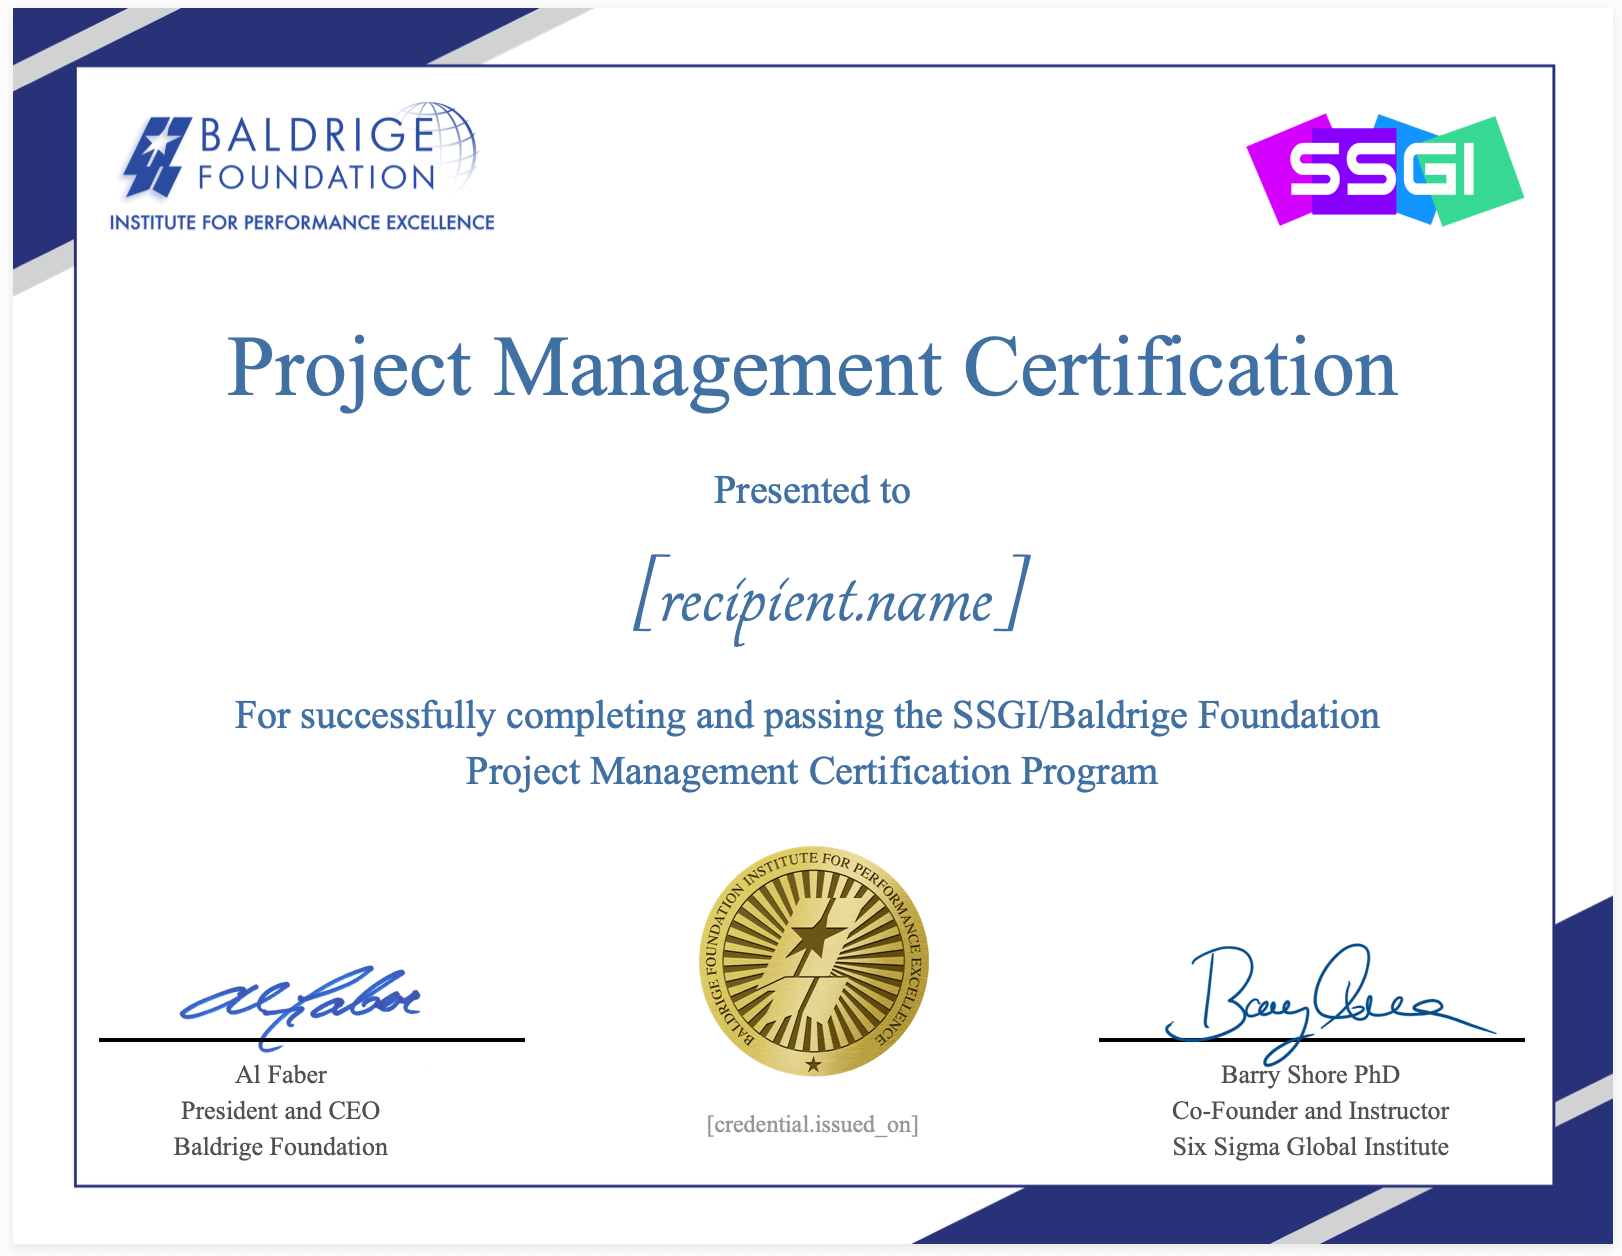 Why get a project management certification